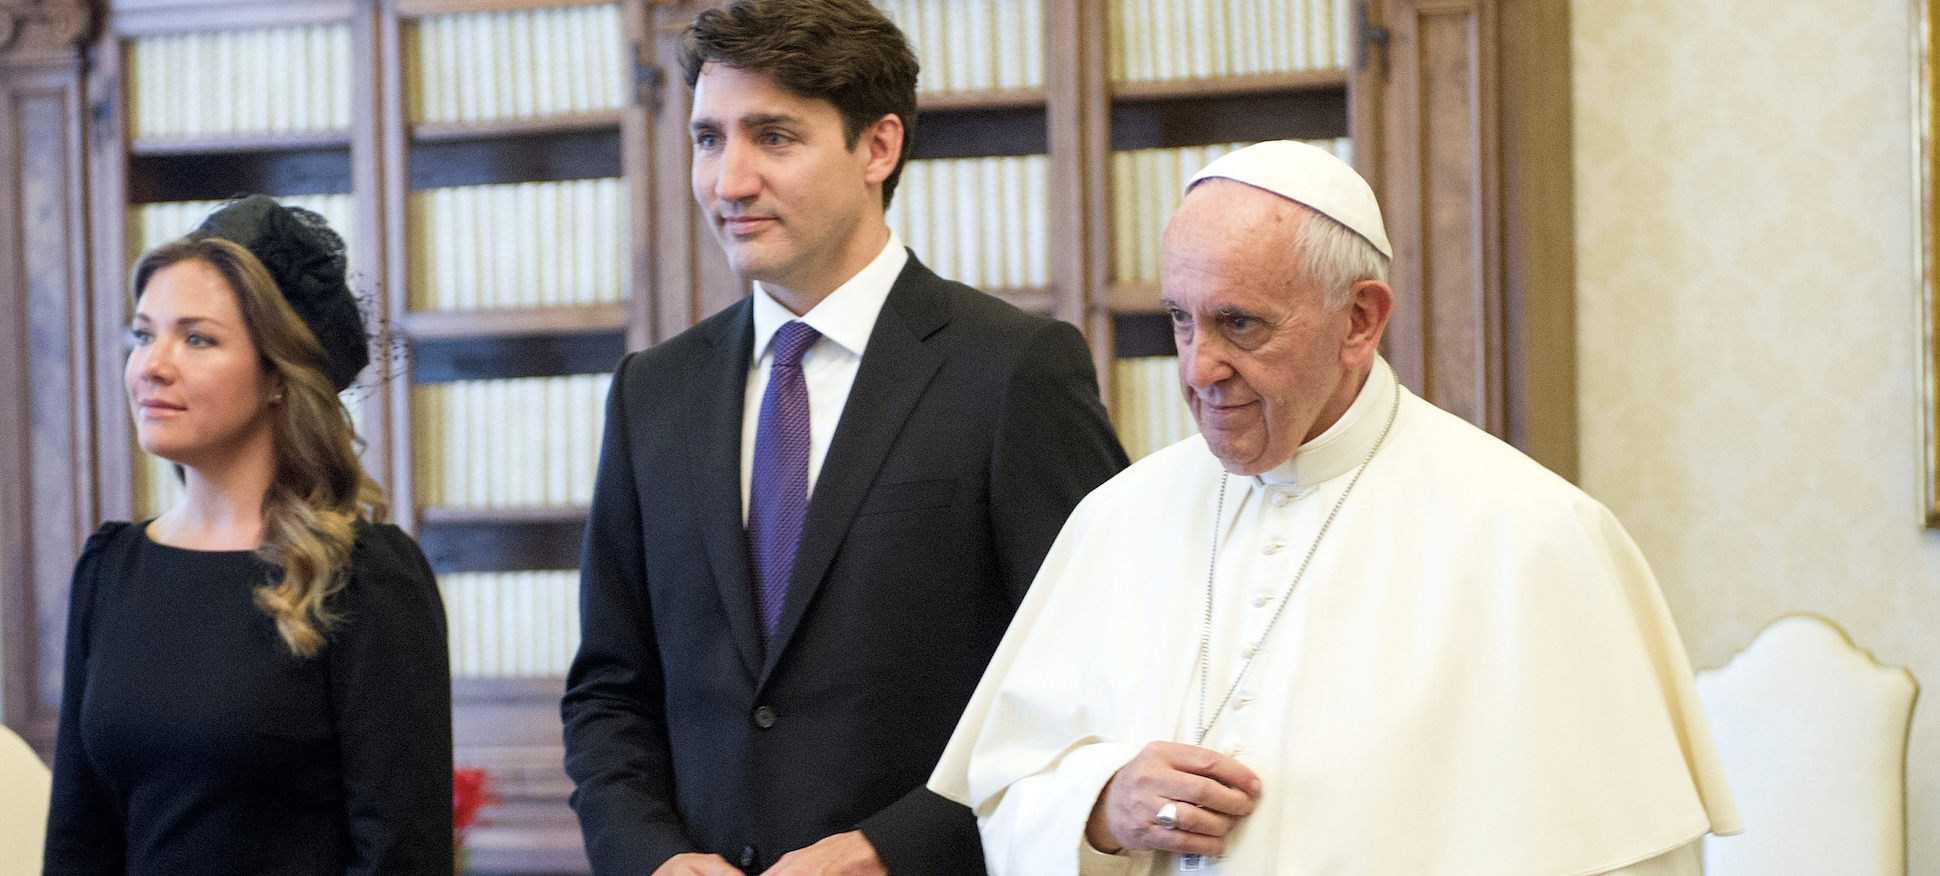 Pope Francis Concedes To Trudeau Apologizes For Catholic Churchs Role In Canadas Forced Assimilation Of Indigenous Children